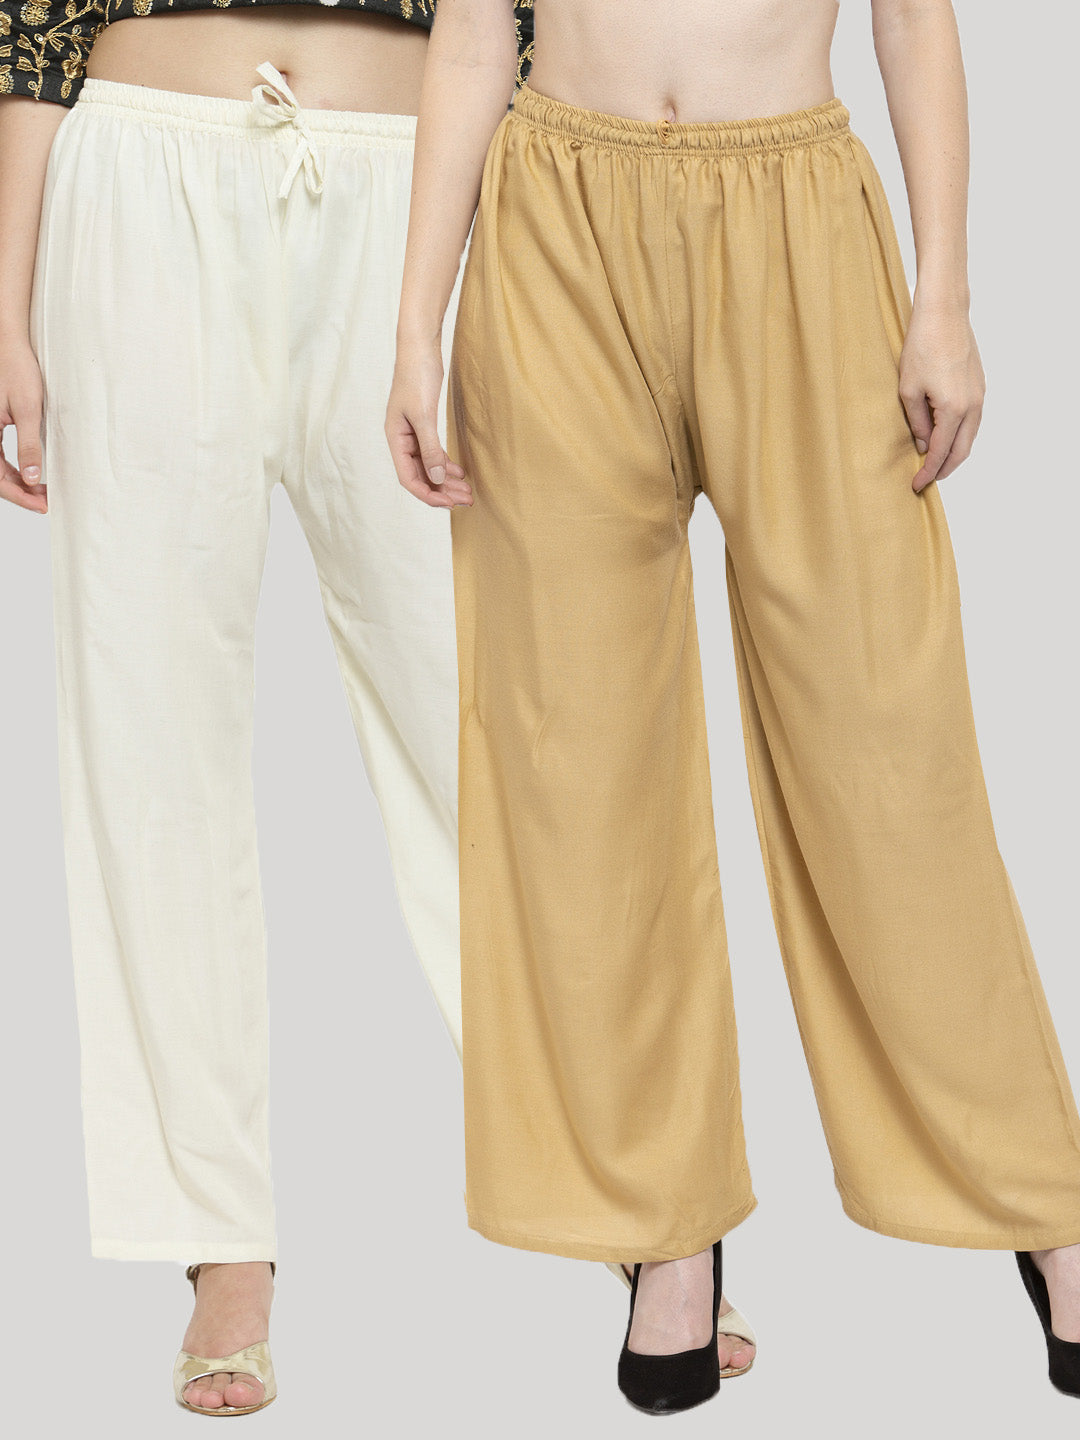 Women's Solid Off-White & Fawn Rayon Palazzo (Pack Of 2) - Wahe-NOOR